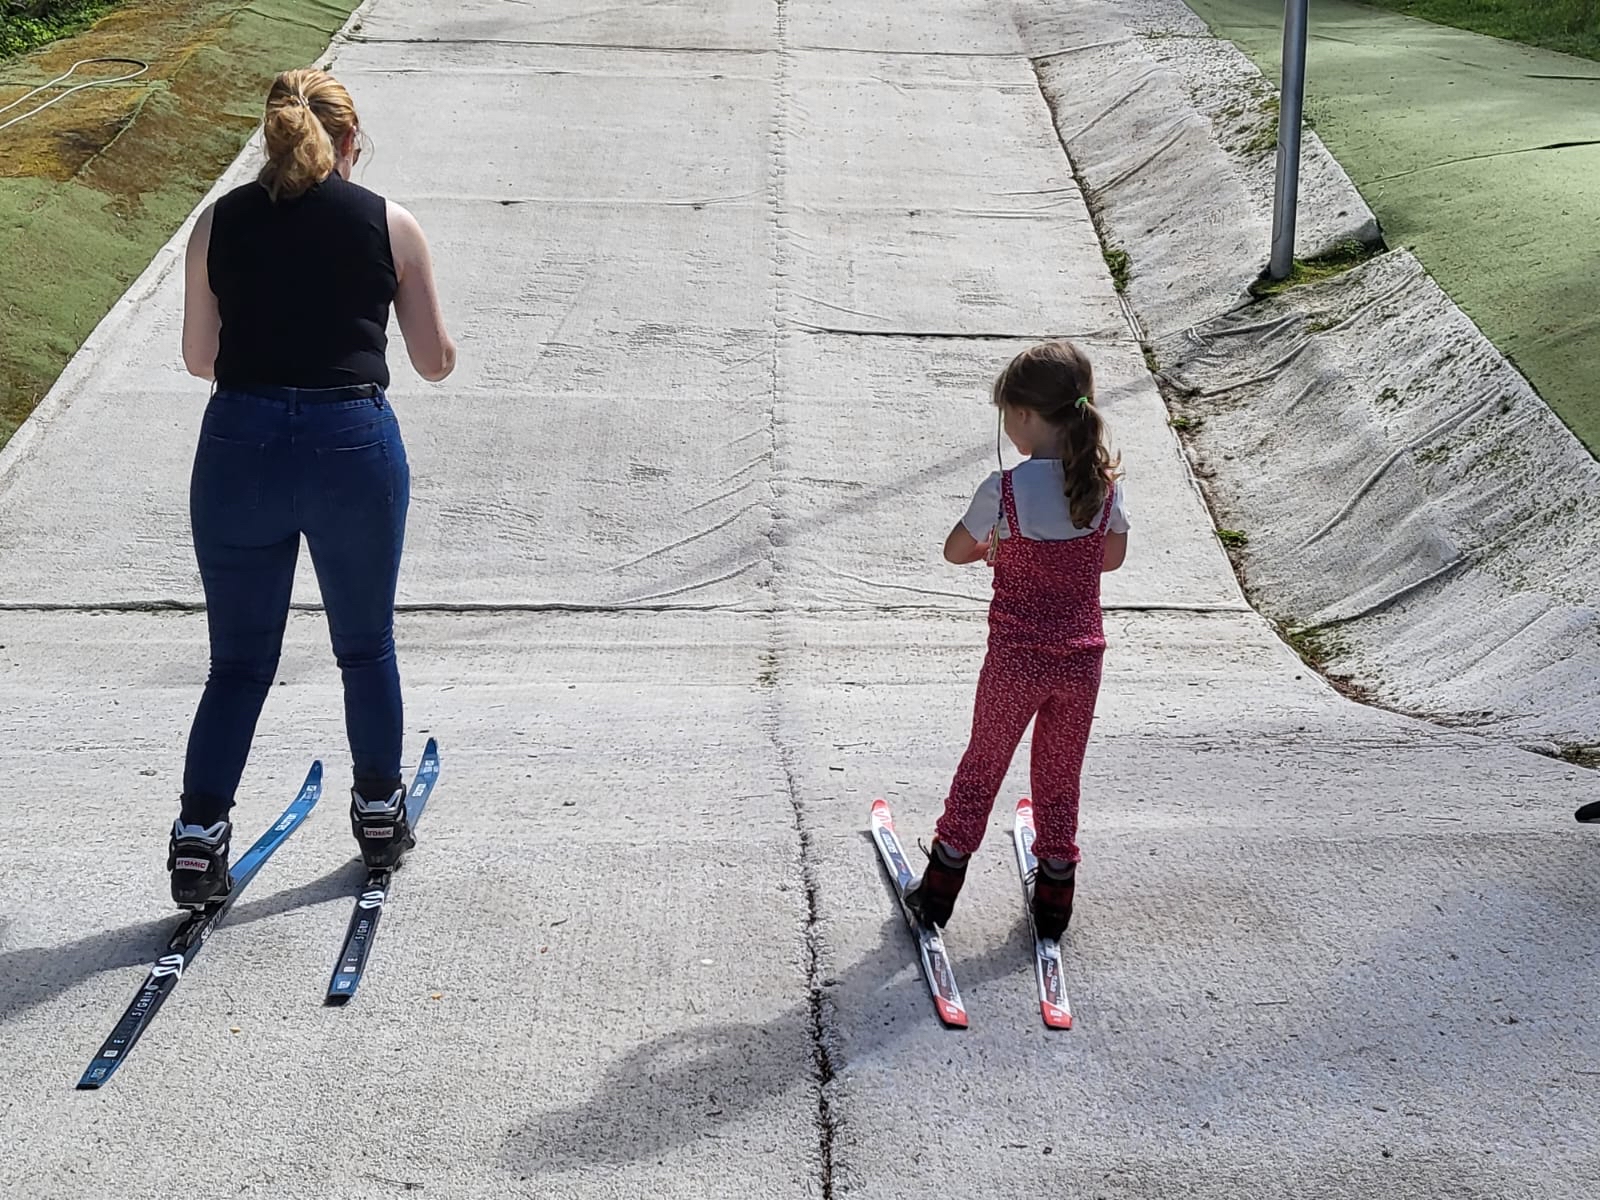 A mother and child skiing down the dry ski slope